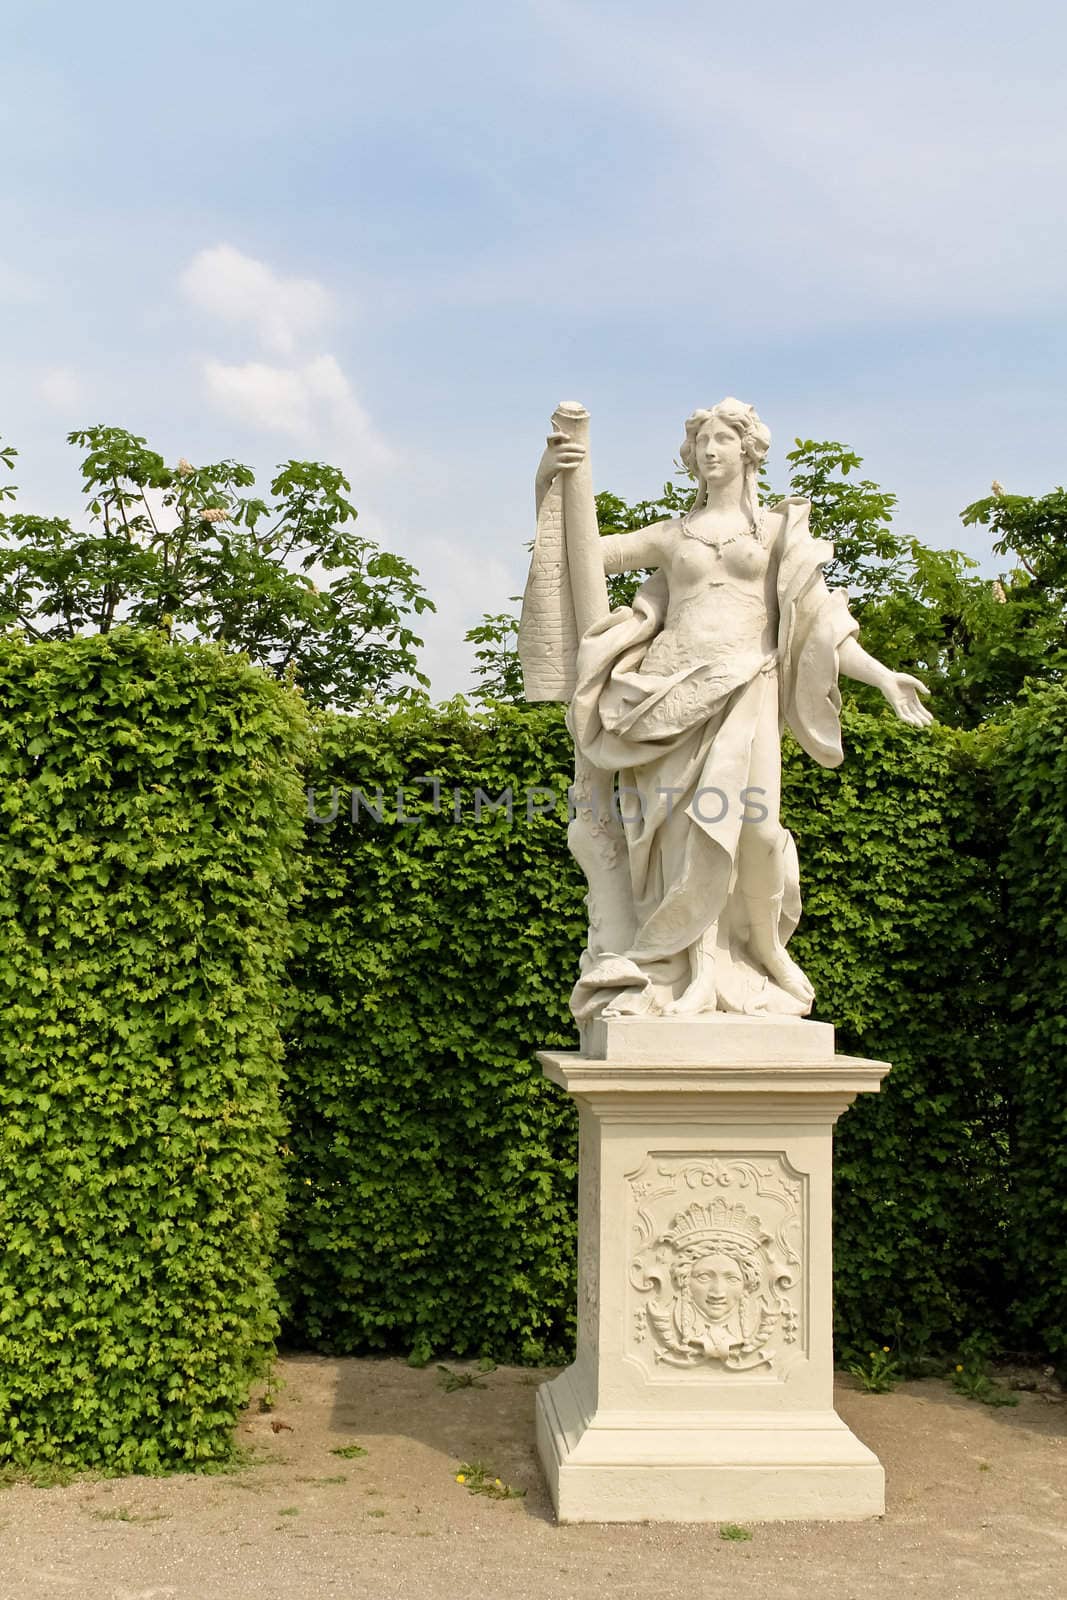 A bare breasted statue in the park of castle Belvedere in Vienna, Austria